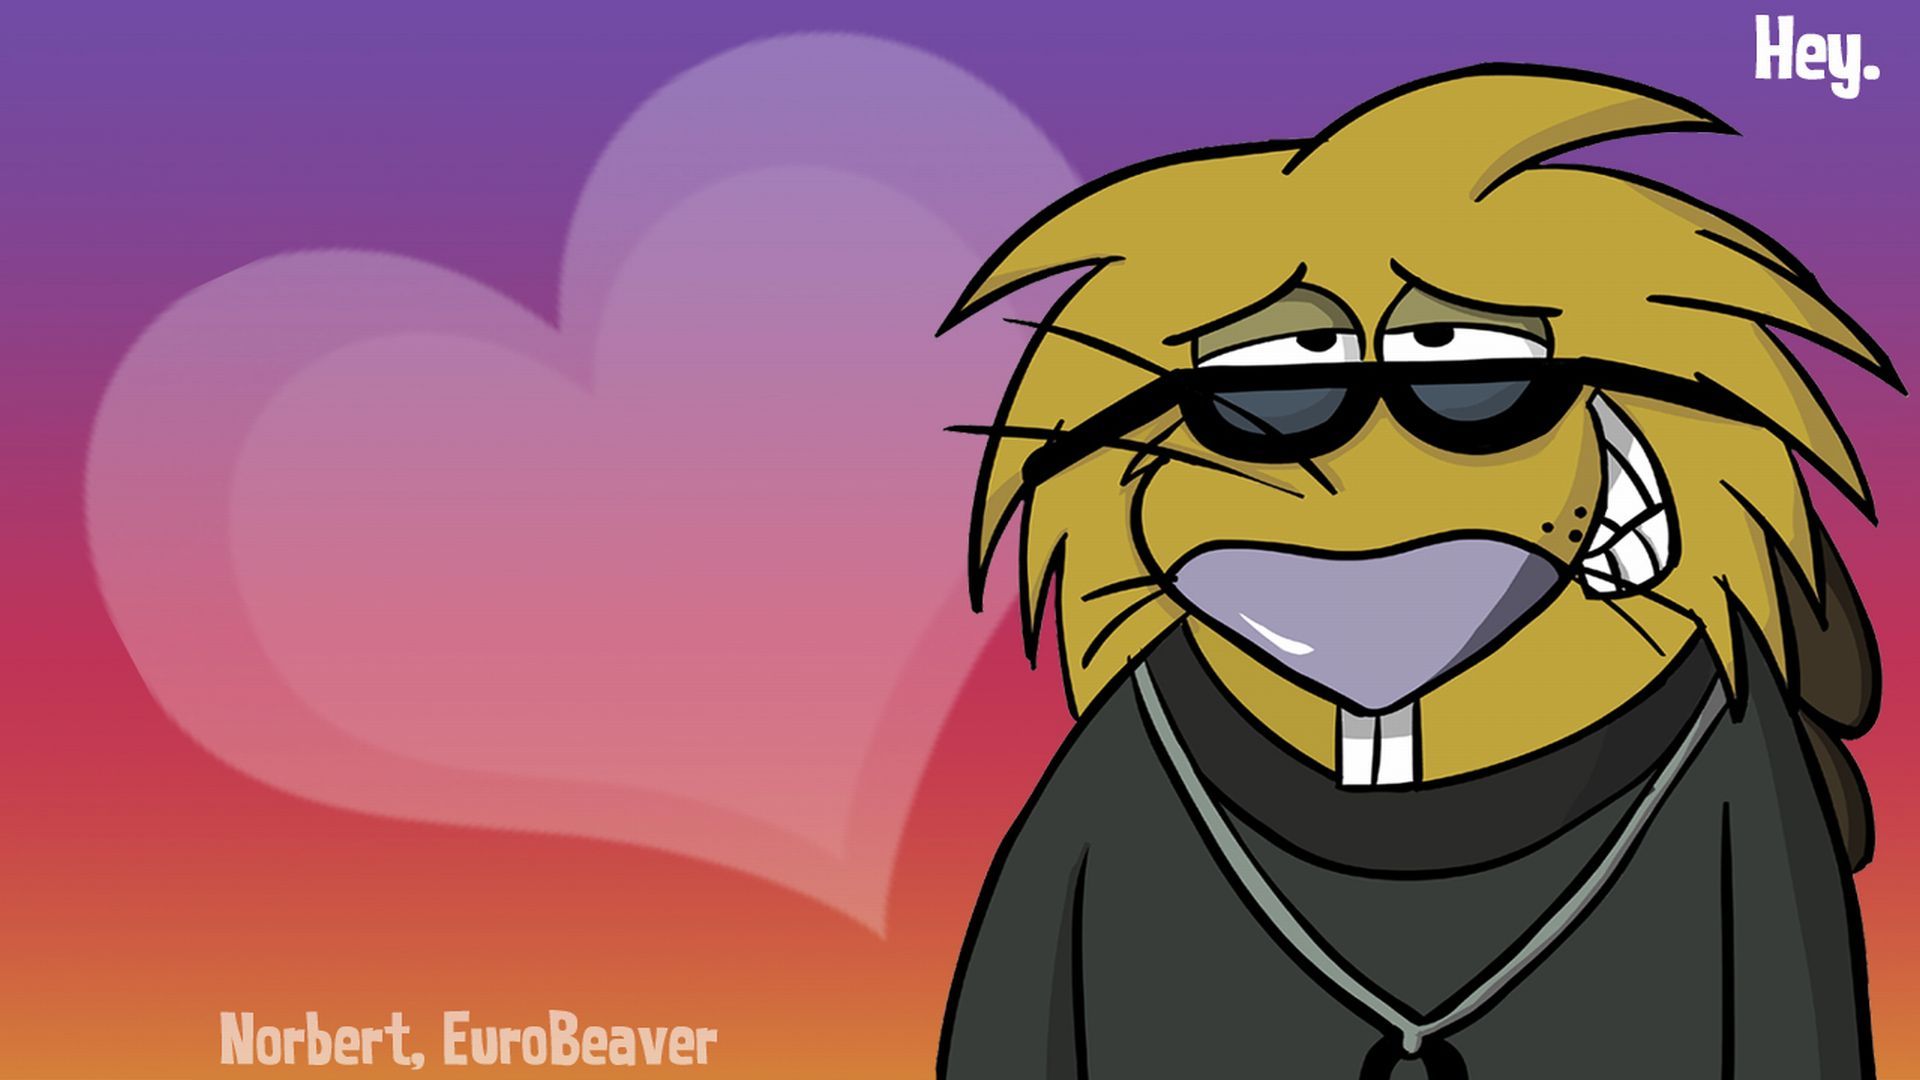 Angry Beavers Wallpapers